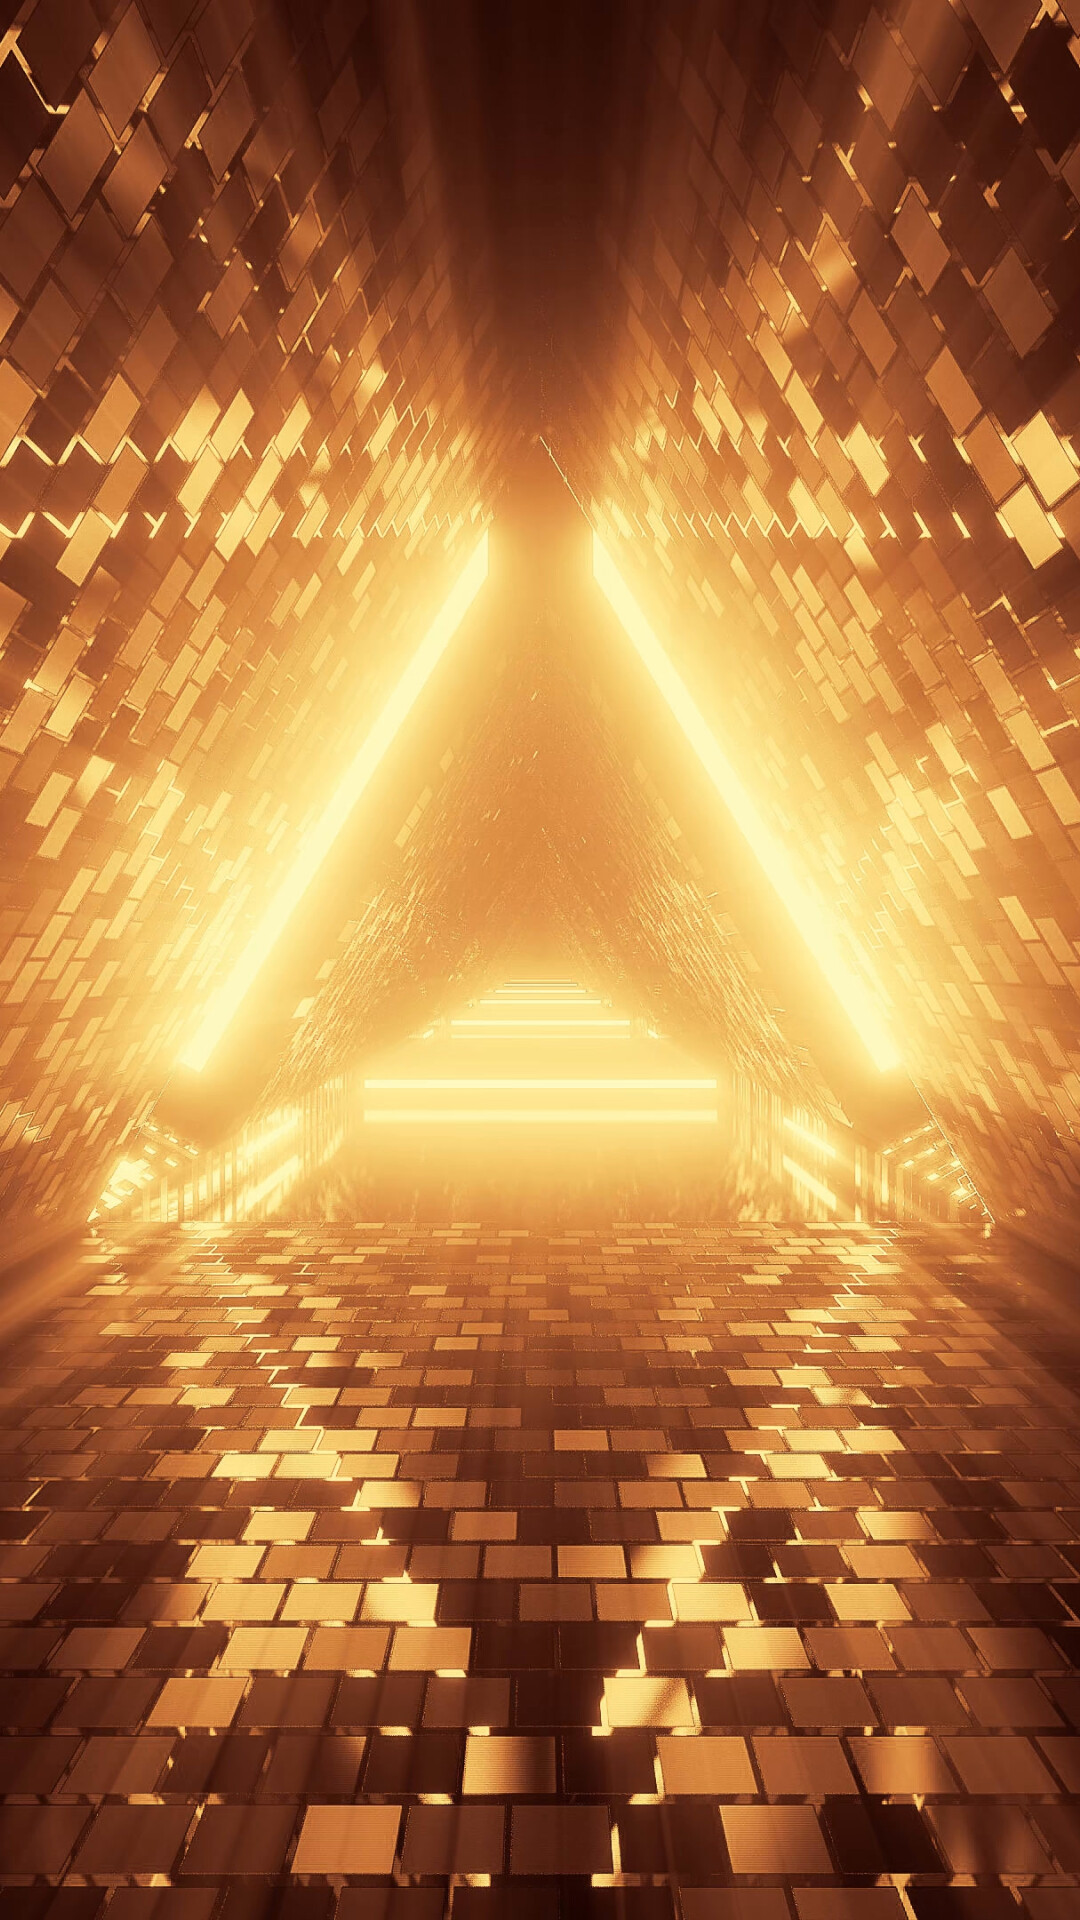 Gold Lights: Glowing light at the end of triangle tunnel, Decorative golden tiles, Warm white LED decoration lights. 1080x1920 Full HD Wallpaper.